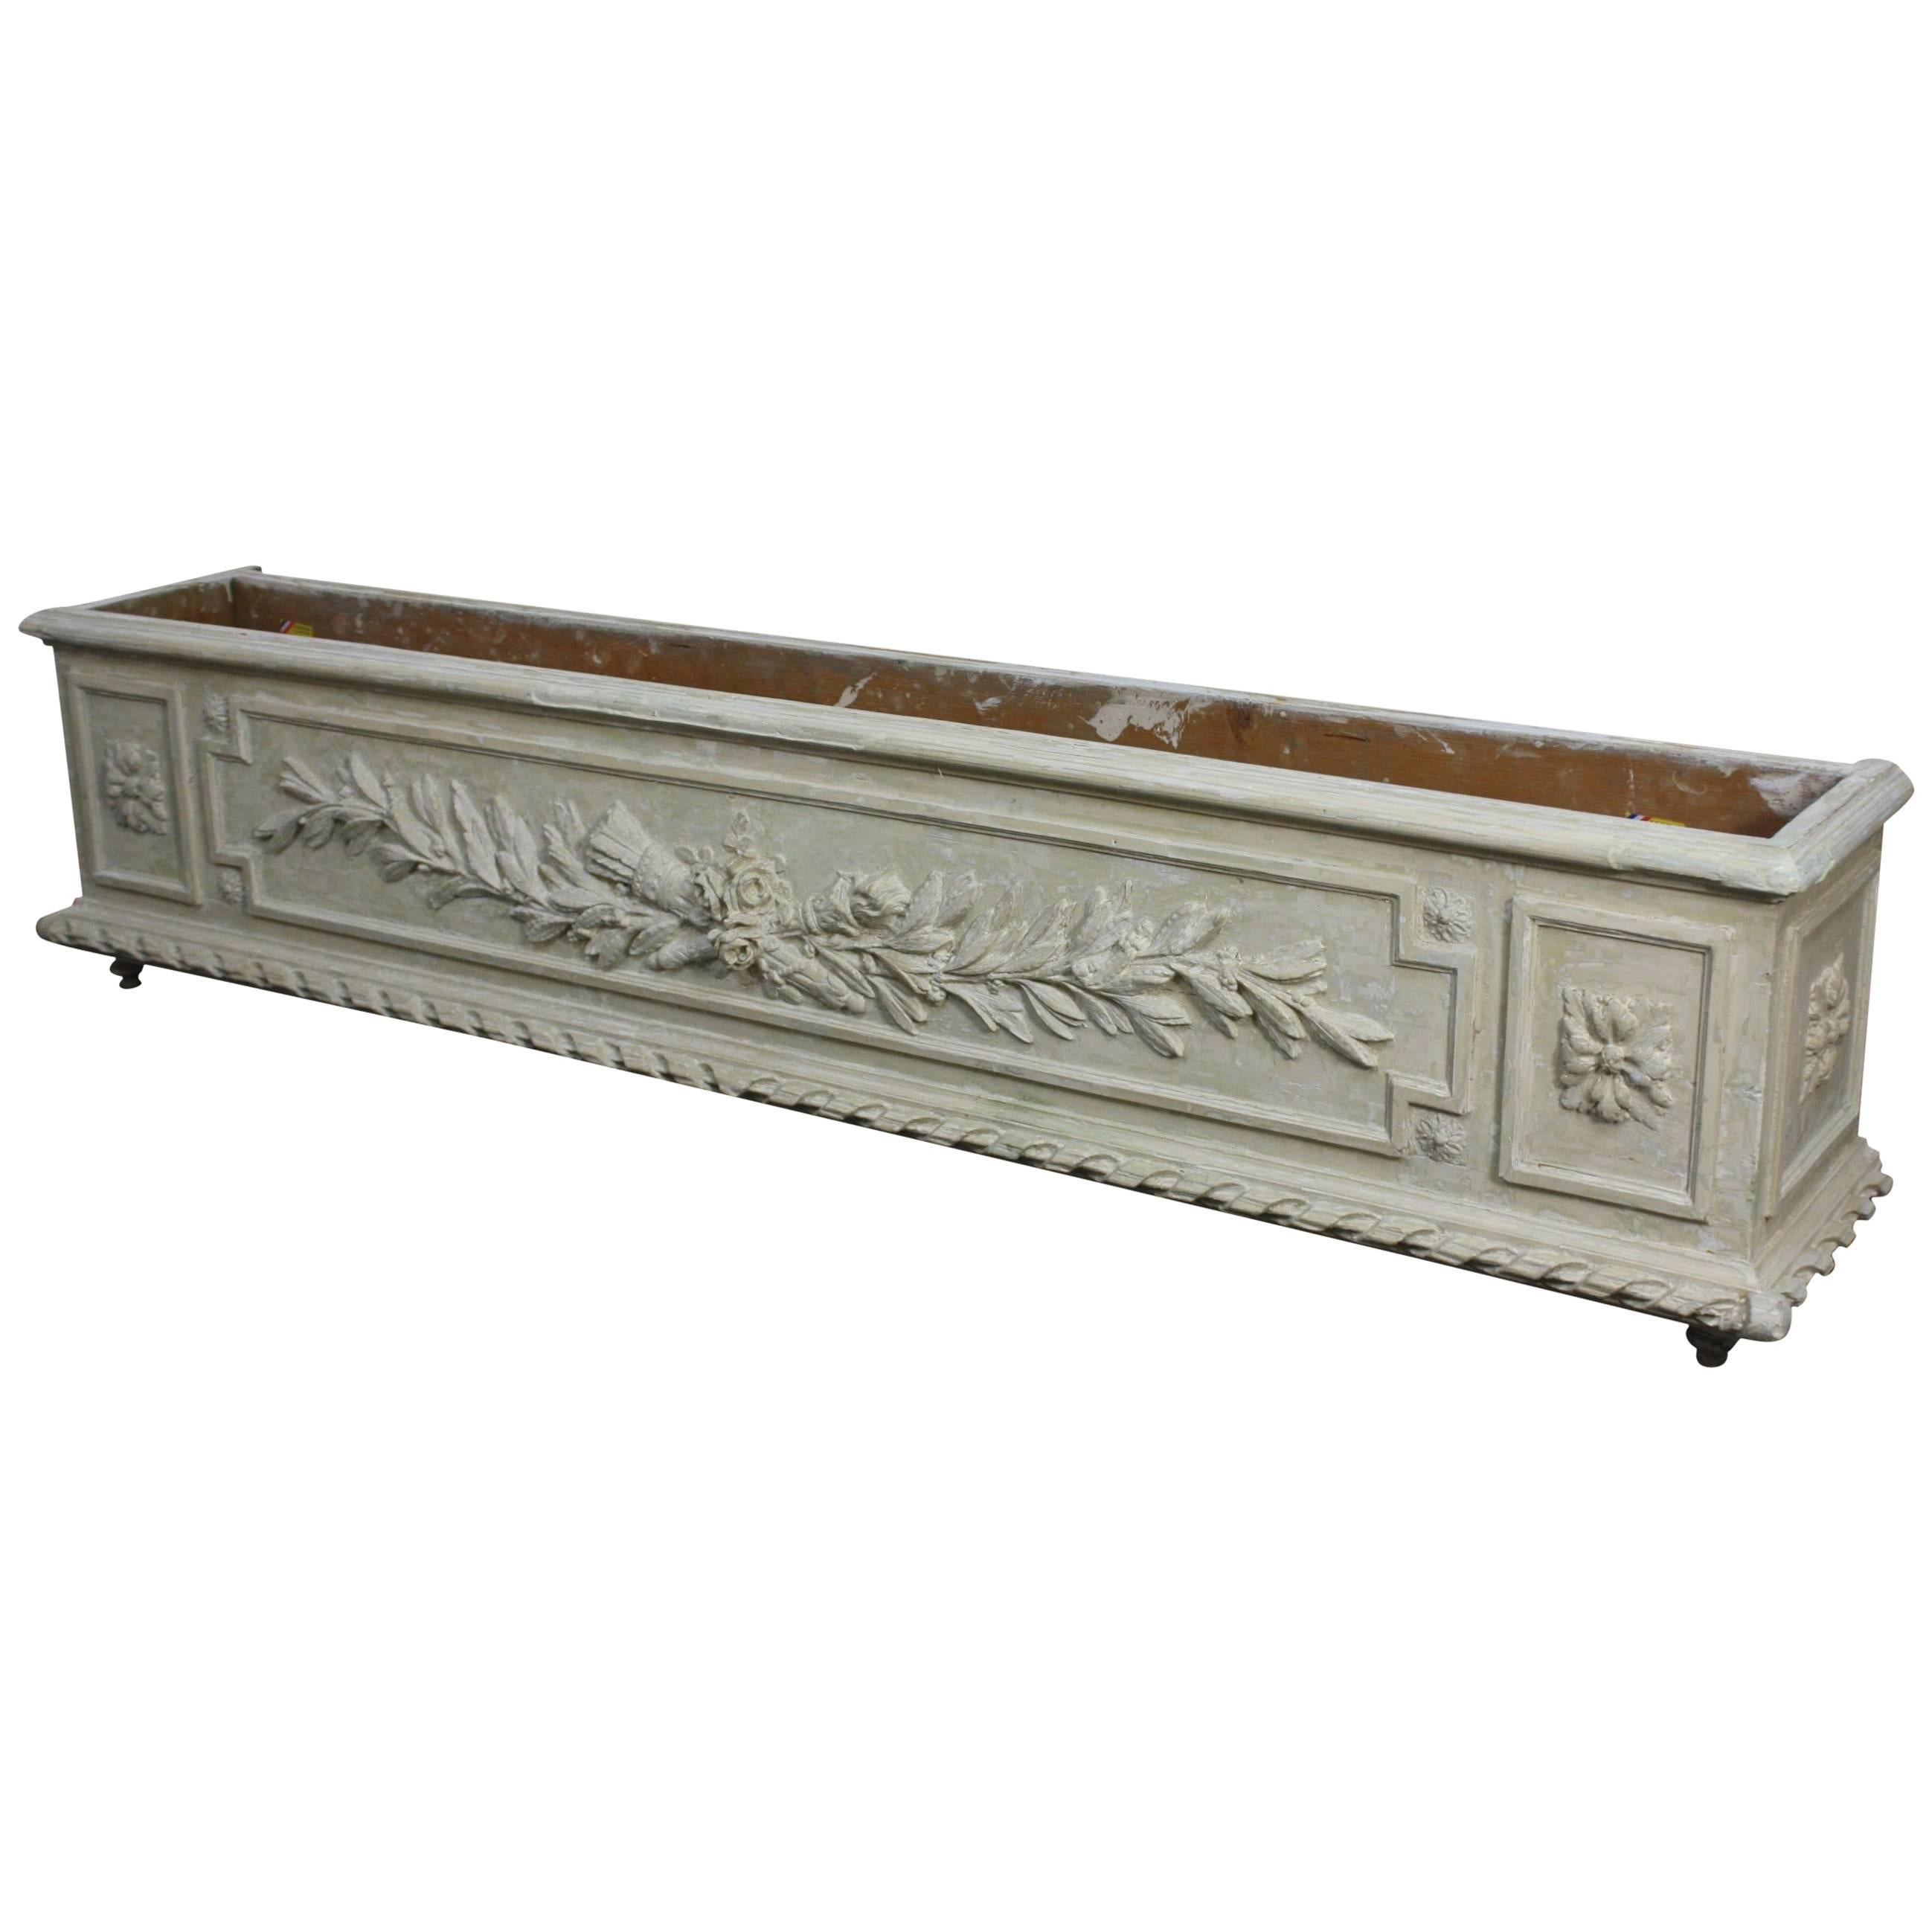 Large Painted and Carved Wood Neoclassical Planter For Sale